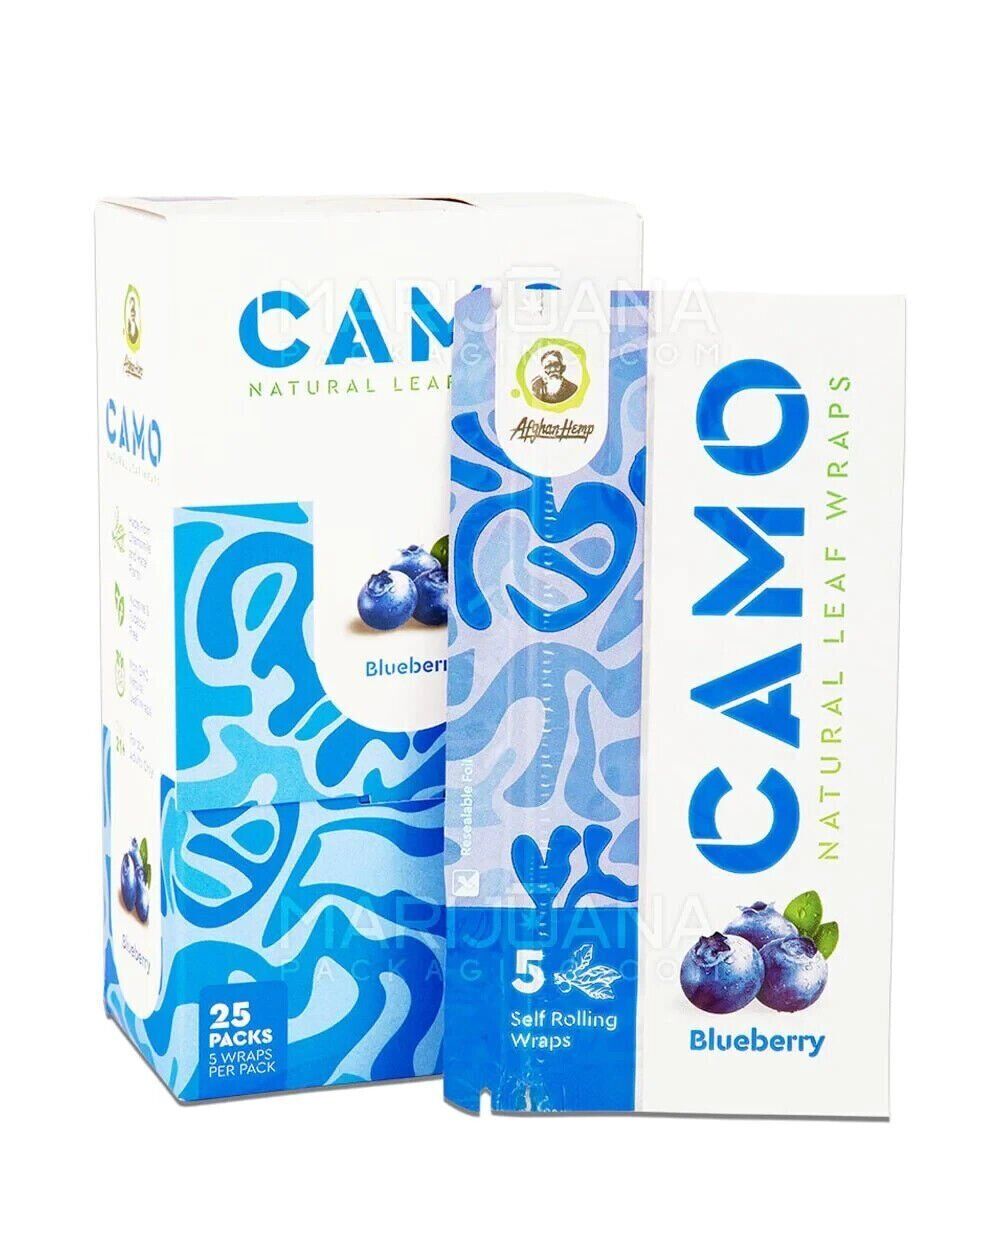 CAMO Natural Leaf Wraps - Blueberry - Box of 25 Packs - 5 Wraps per Pack